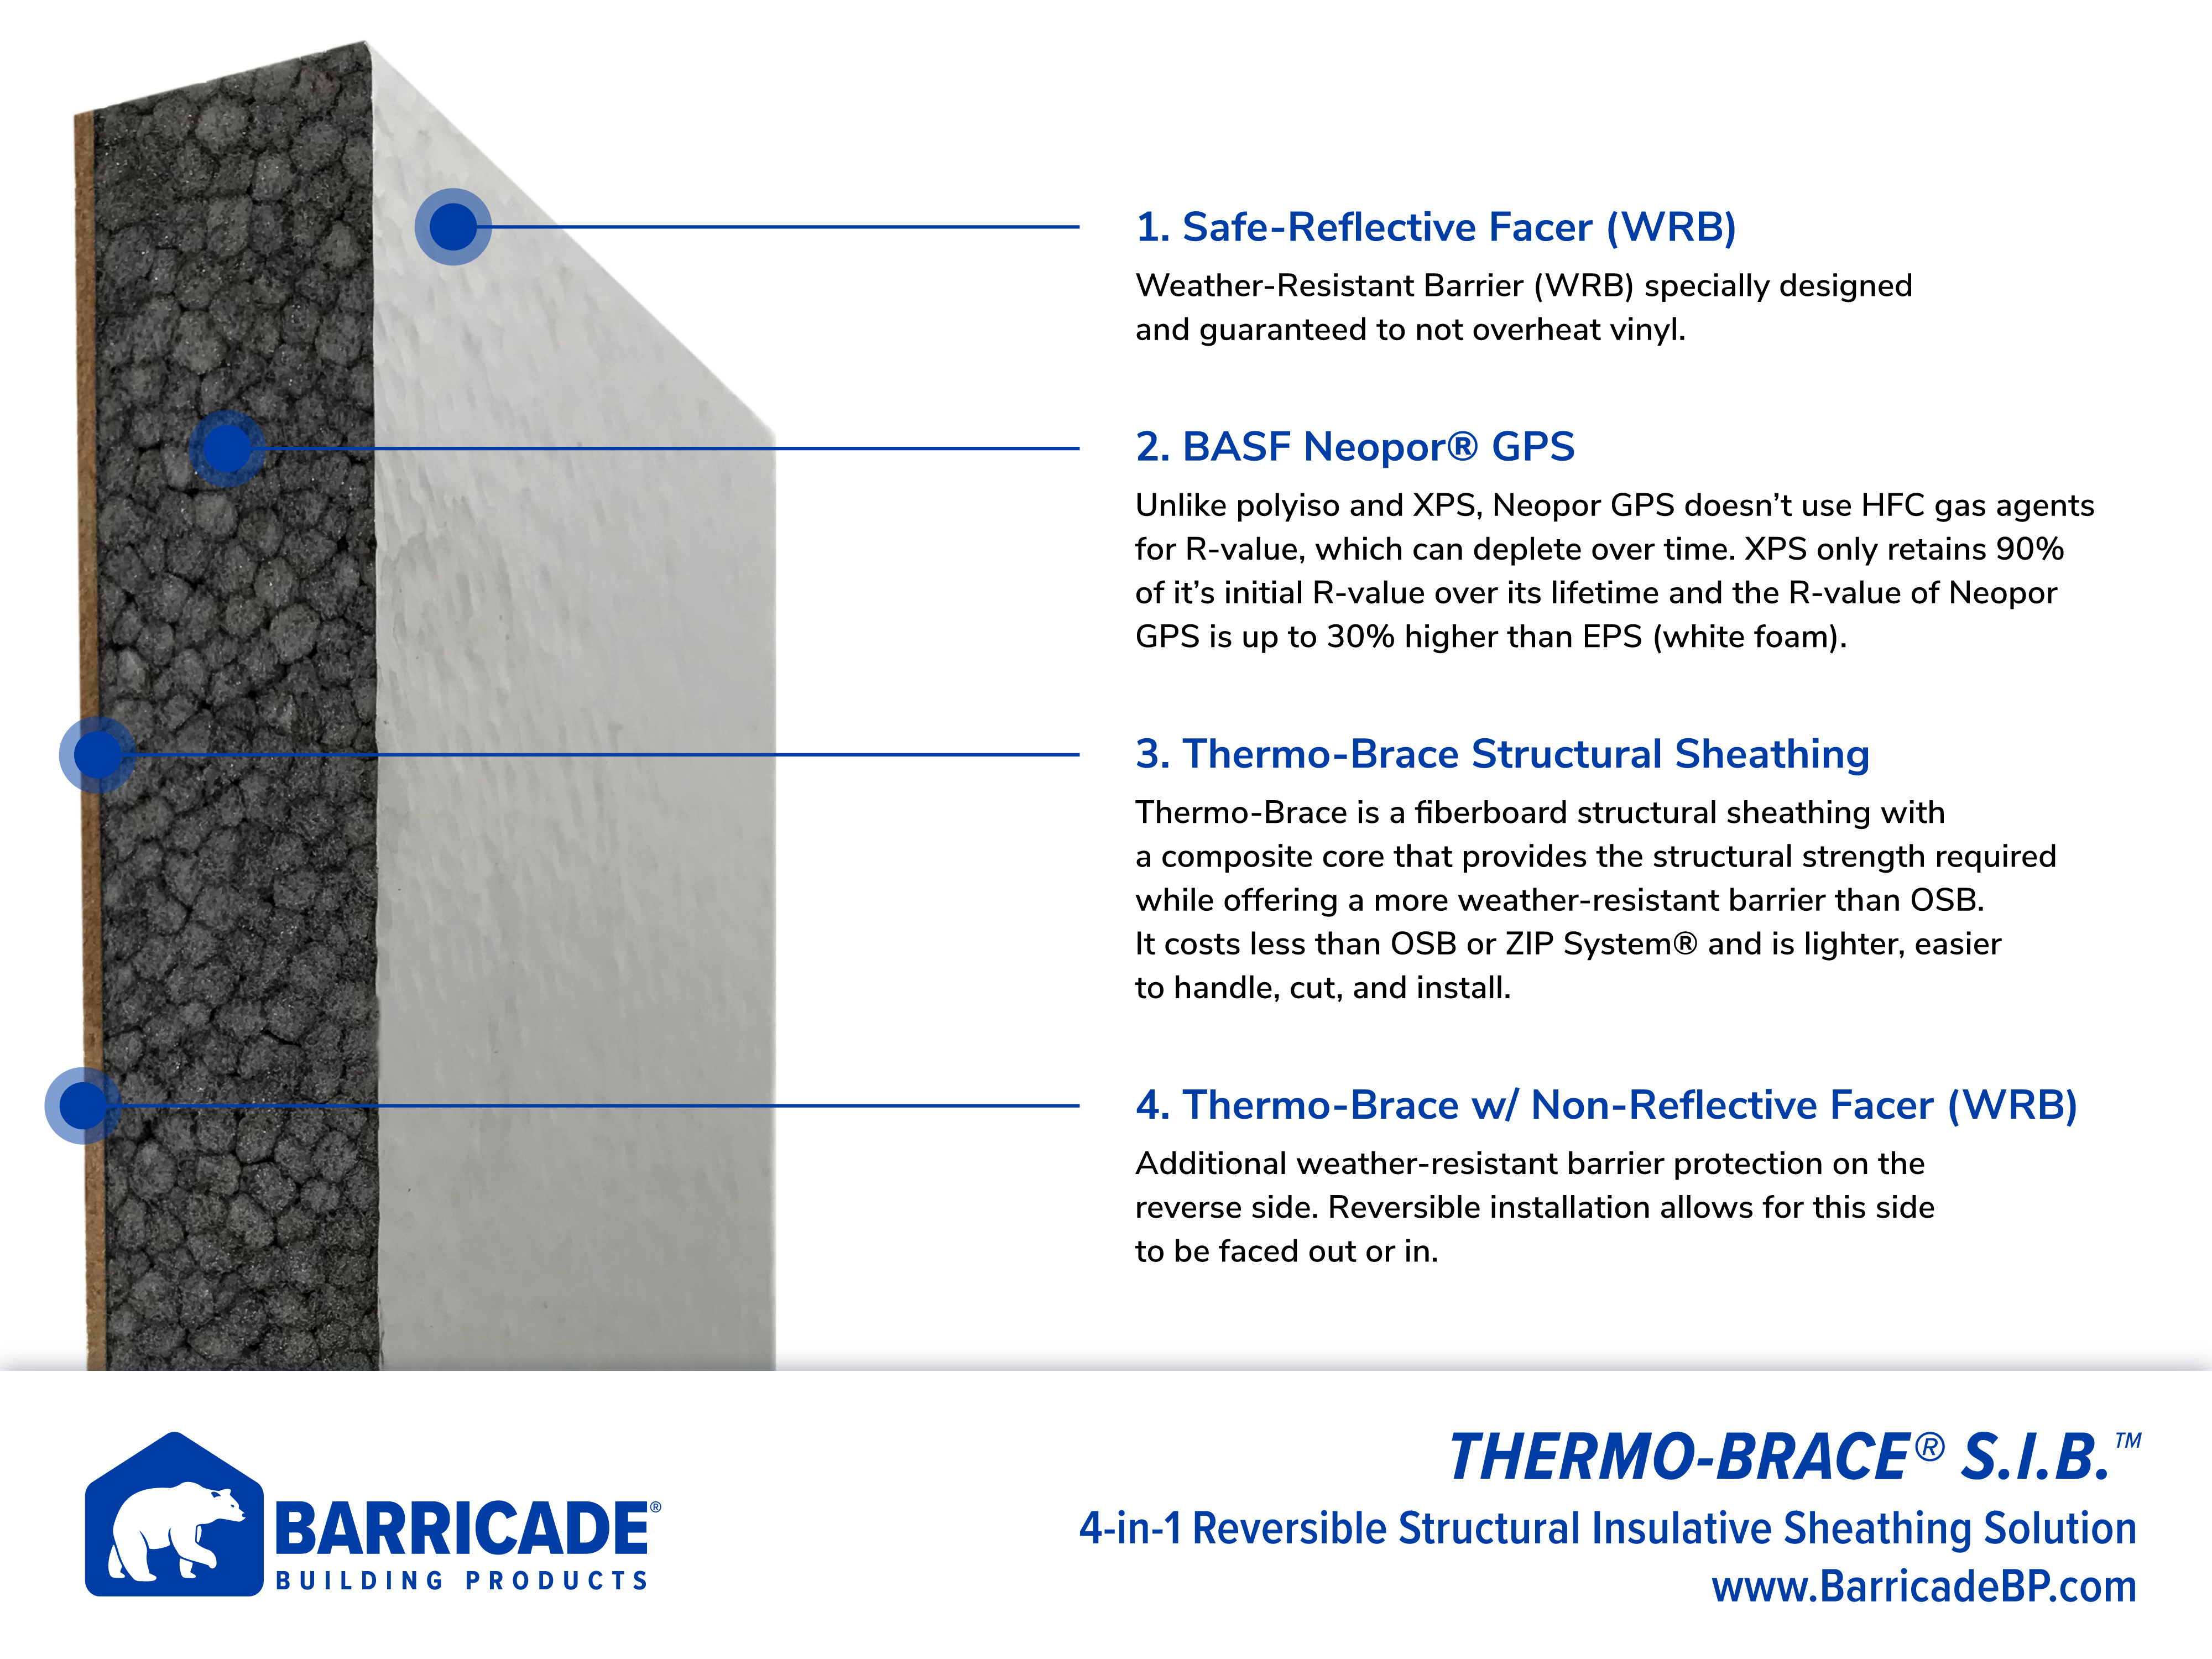 Barricade Thermo-Brace S.I.B. 4-in-1 reversible structural insulative sheathing component diagram displaying BASF Neopor GPS insulative foam. 